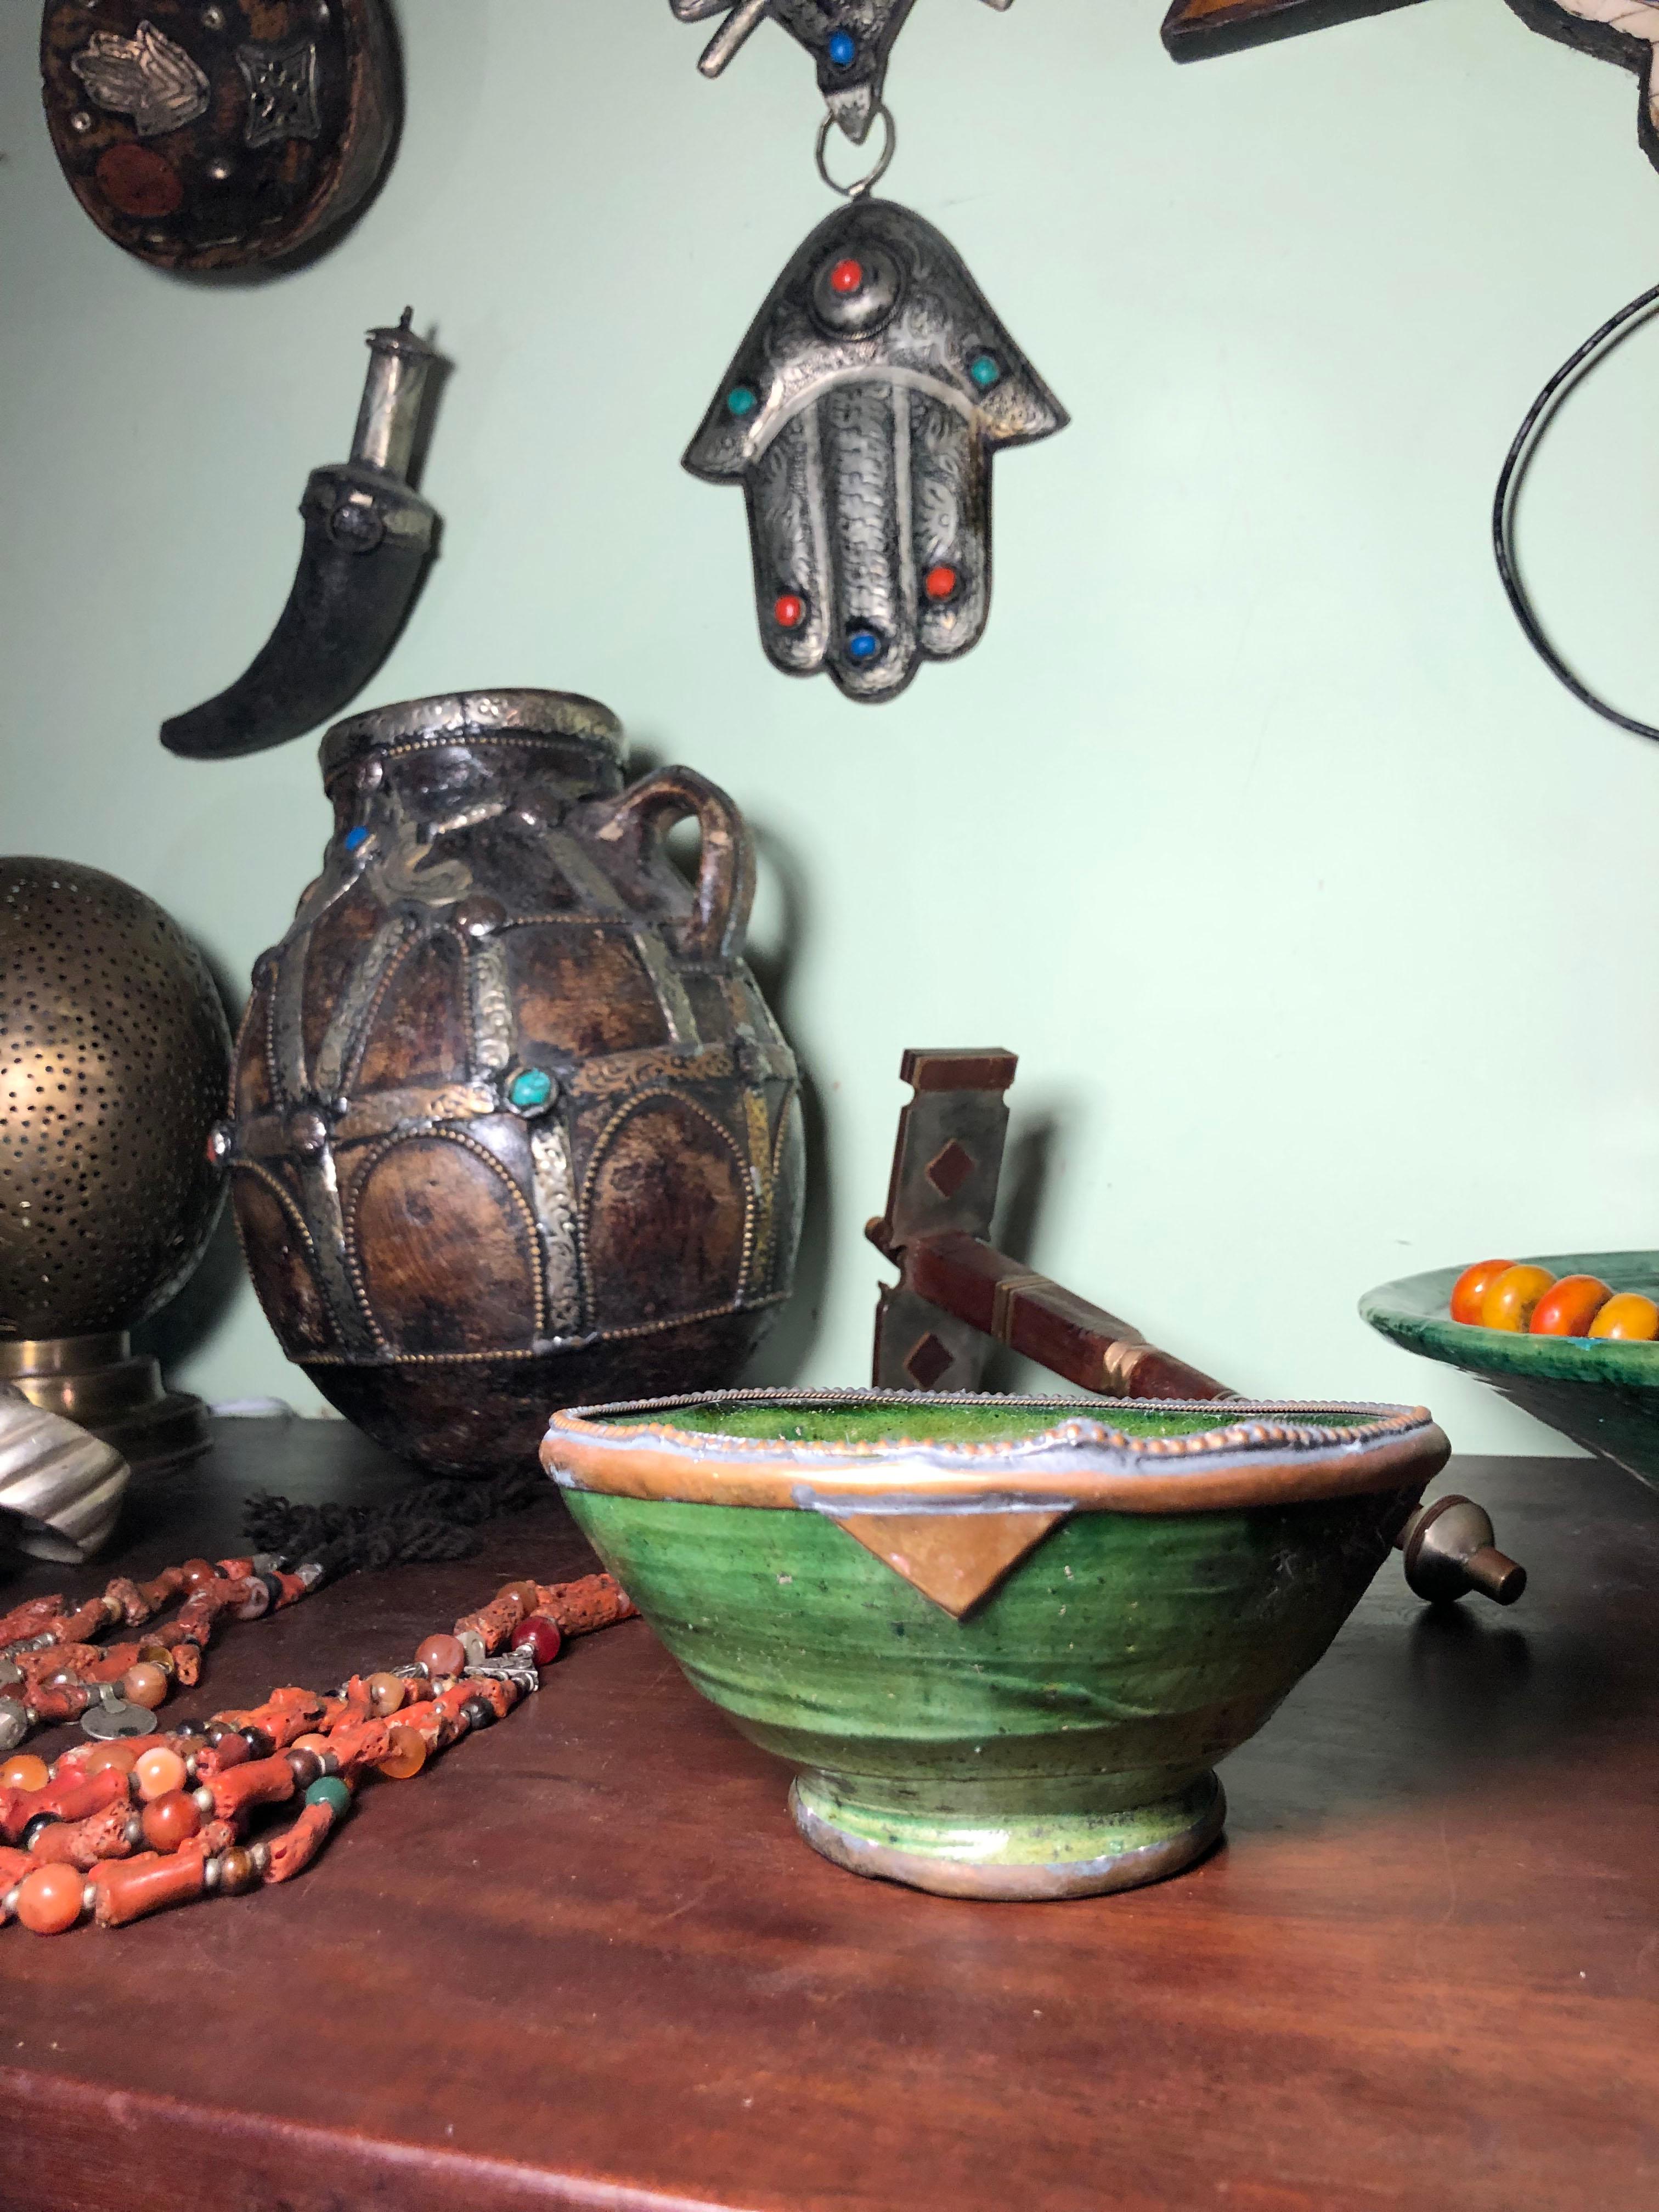 This Moroccan green pottery bowl was handmade in Tamegroute, a small village in the Draa Valley of southern Morocco. The spectacular green pottery gets its color from naturally occurring copper in the clay from the Draa River and a magnesium-based